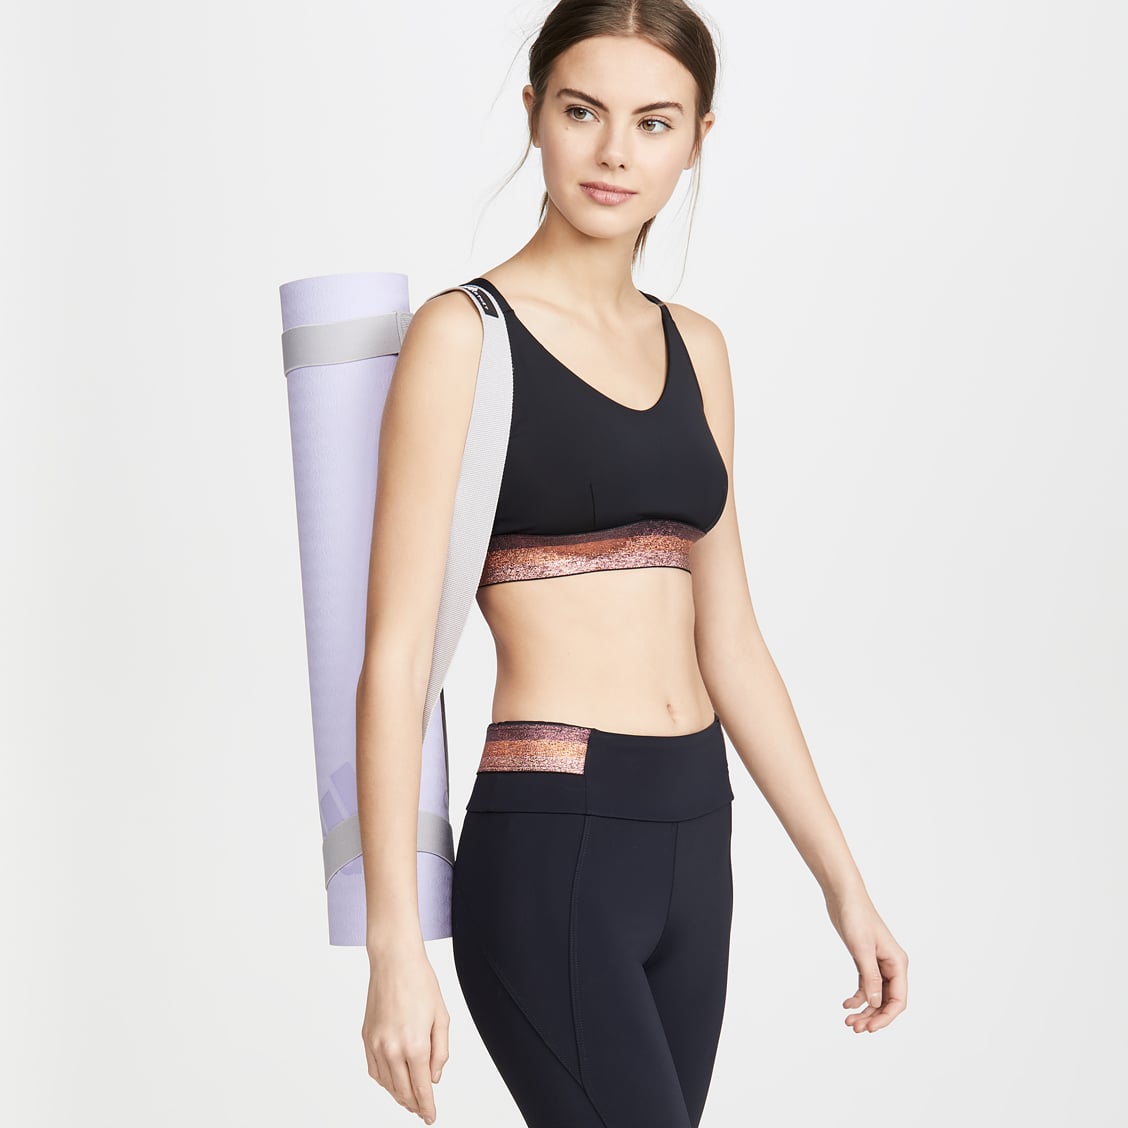 All Bodies Have a Right to Cute Workout Clothes, K? – StyleCaster